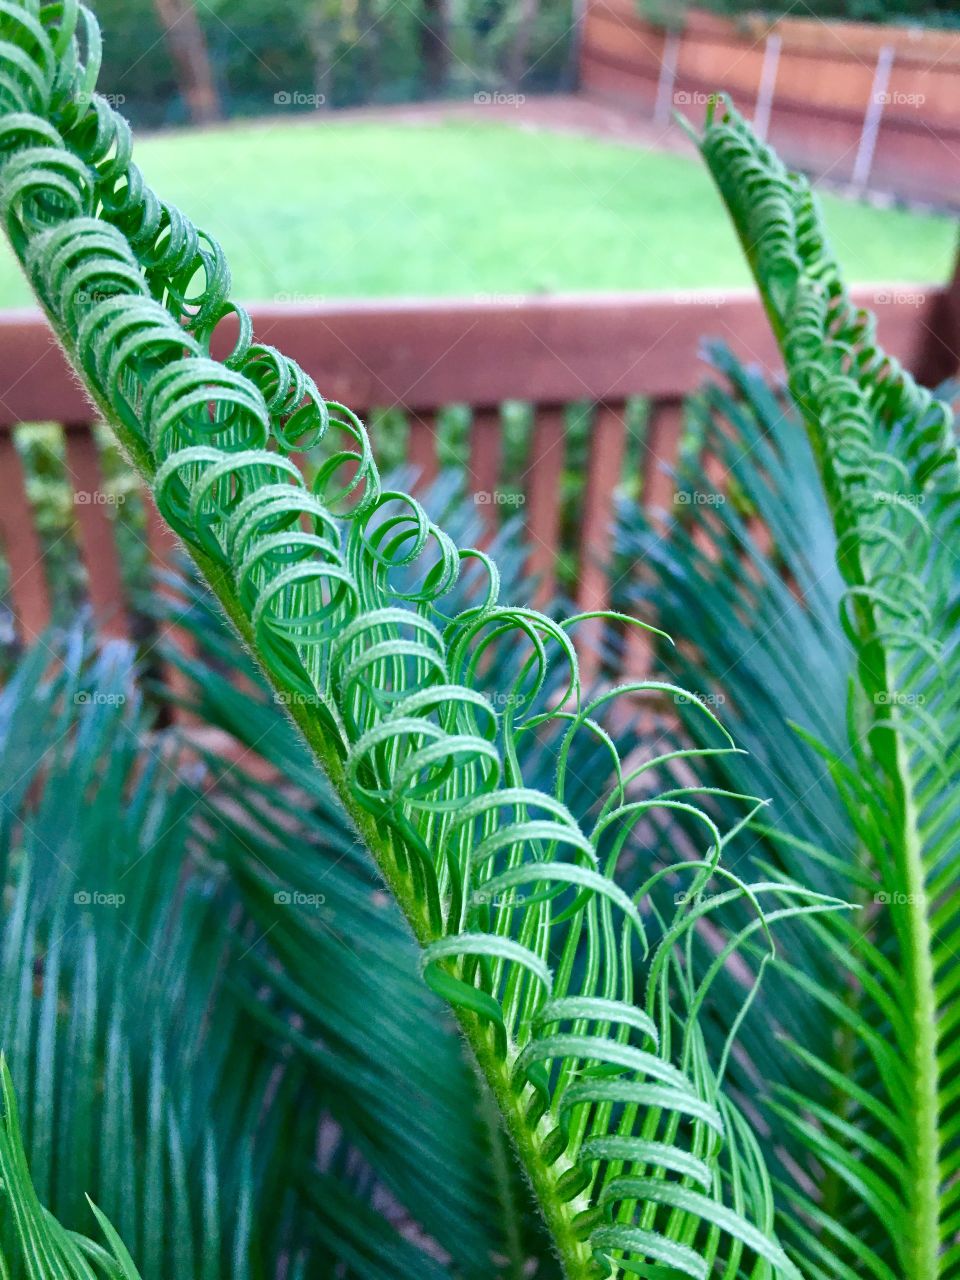 Curly fronds